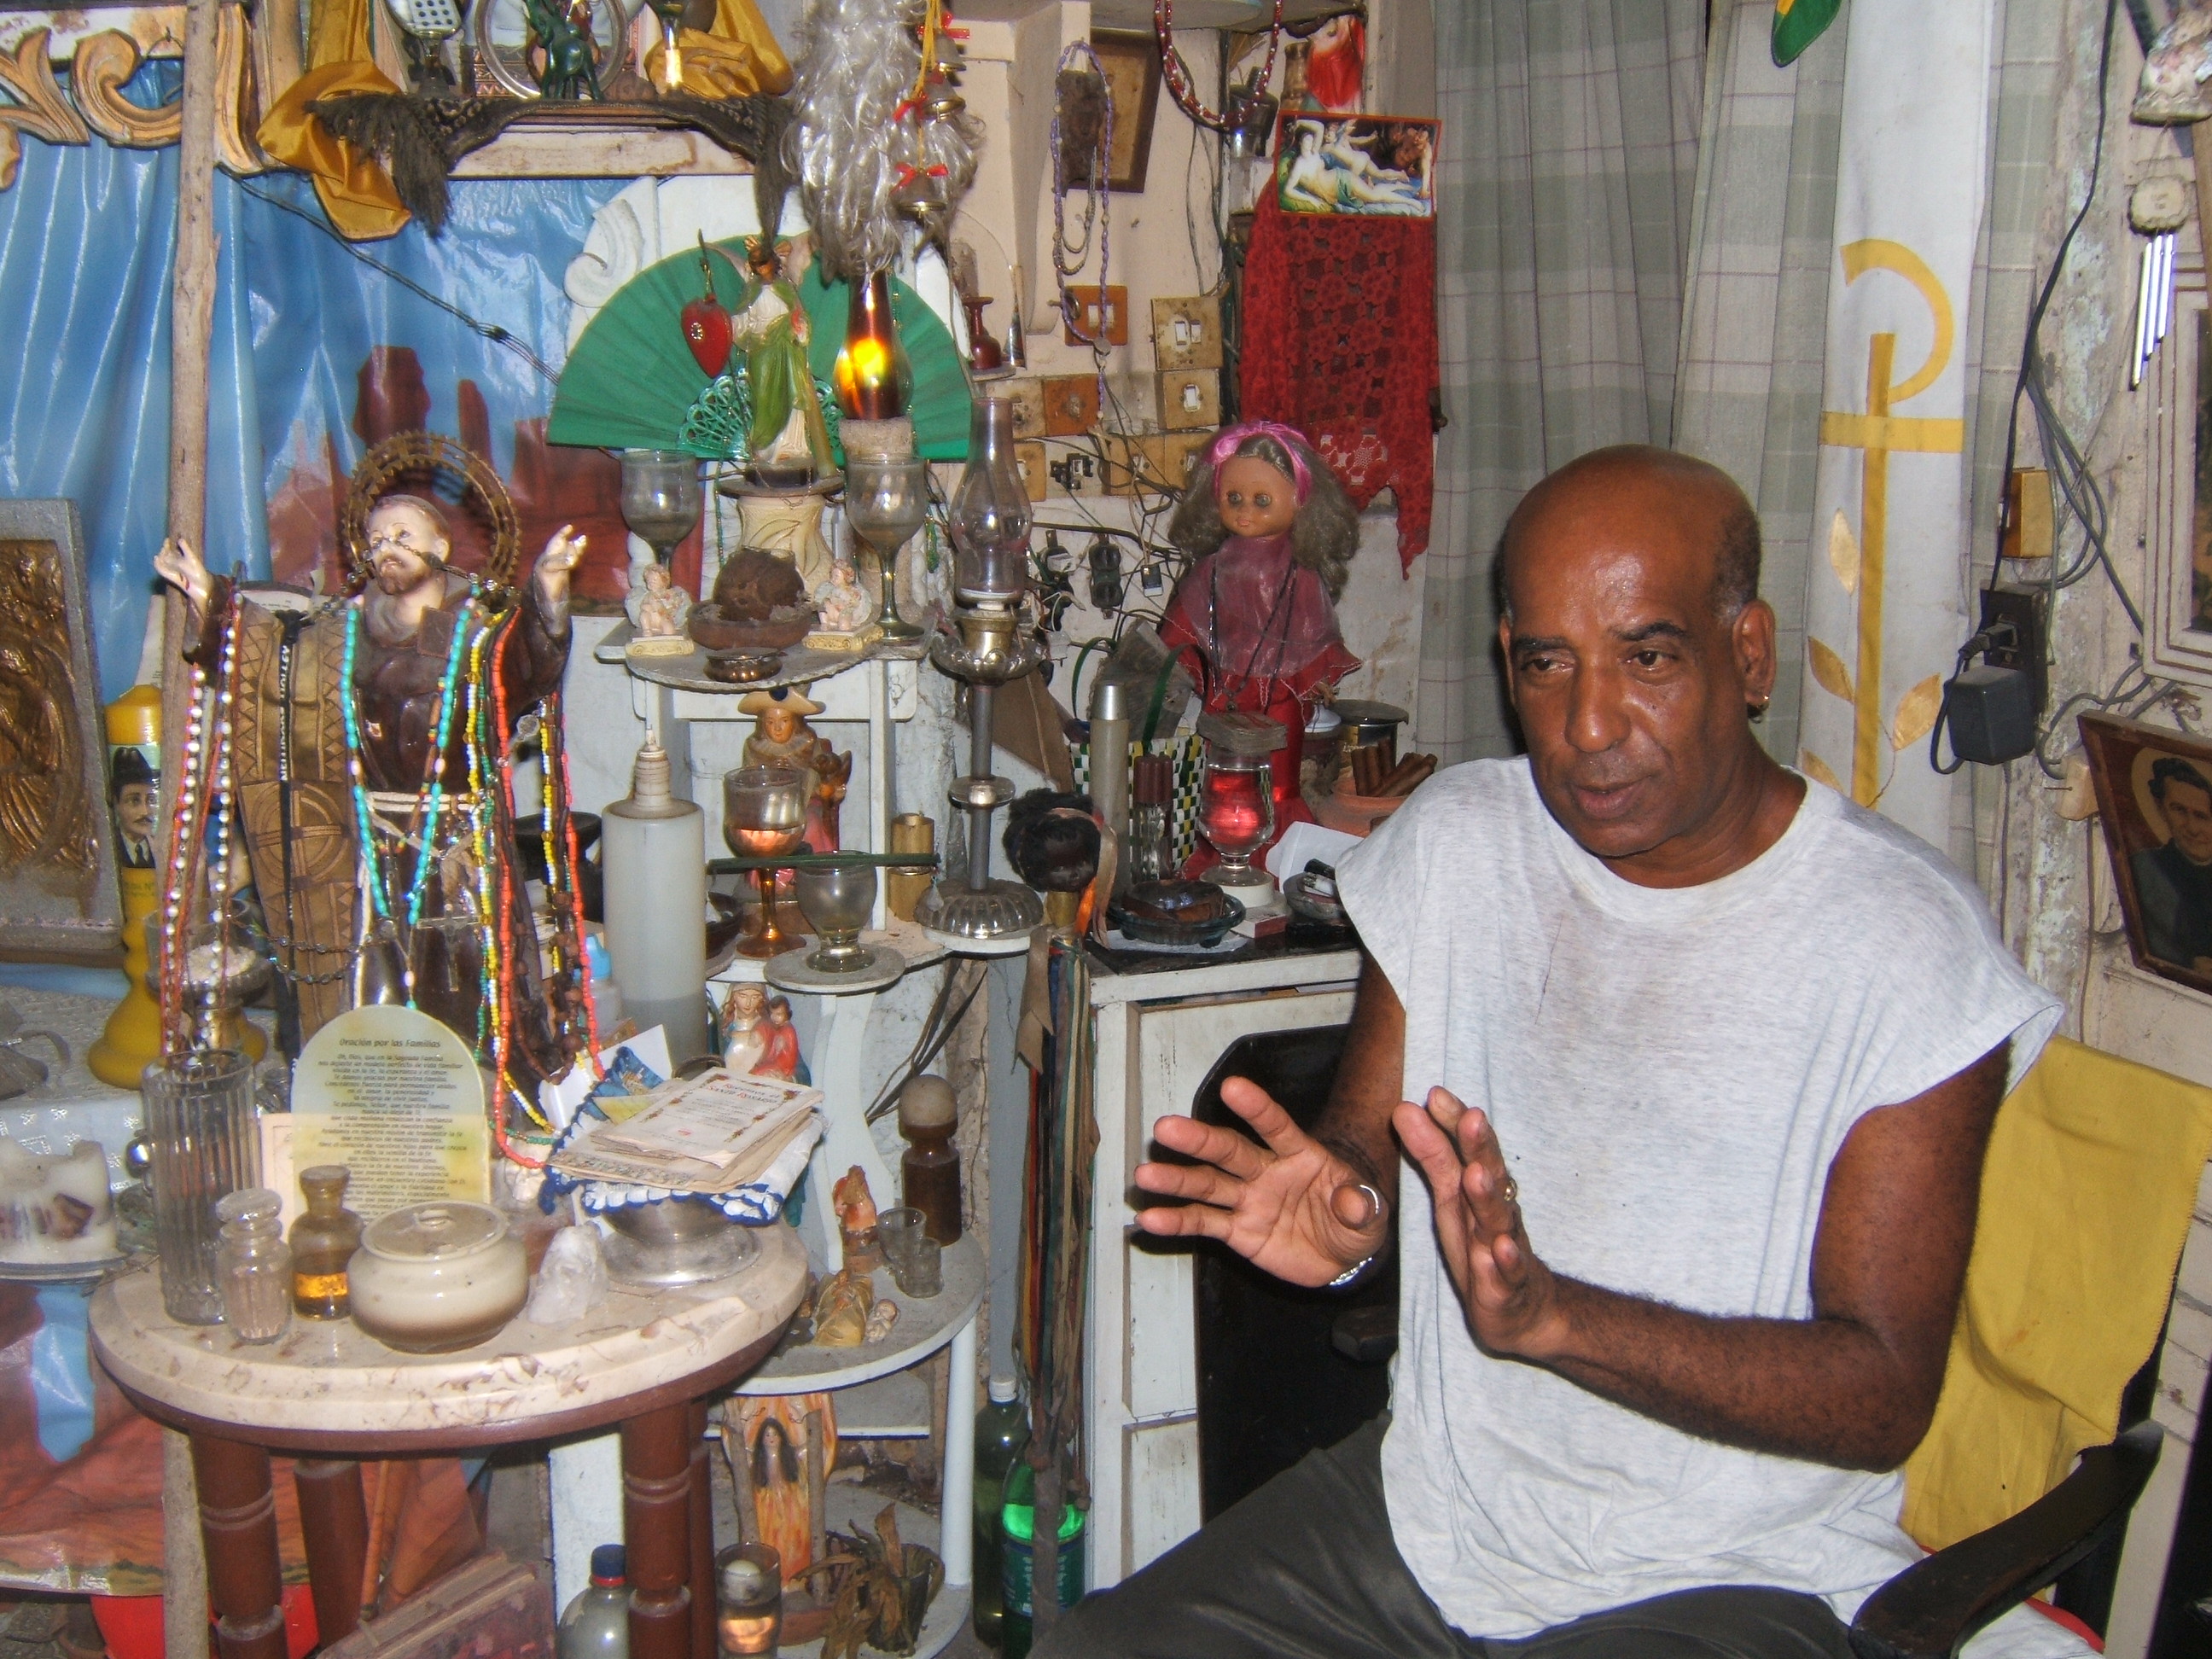 Figure 5. Pedro sits in front of a doll representing his Gypsy spirit (doll in pink), explaining something to the author. Next to him (left), a plaster figurine of San Francisco is draped with beaded necklaces (some representing orichas). He uses the booklet of prayers on the table to initiate spiritual consultations, in which he reads cards to receive images from the spirits. Santiago de Cuba, August 2008. Photograph by author.